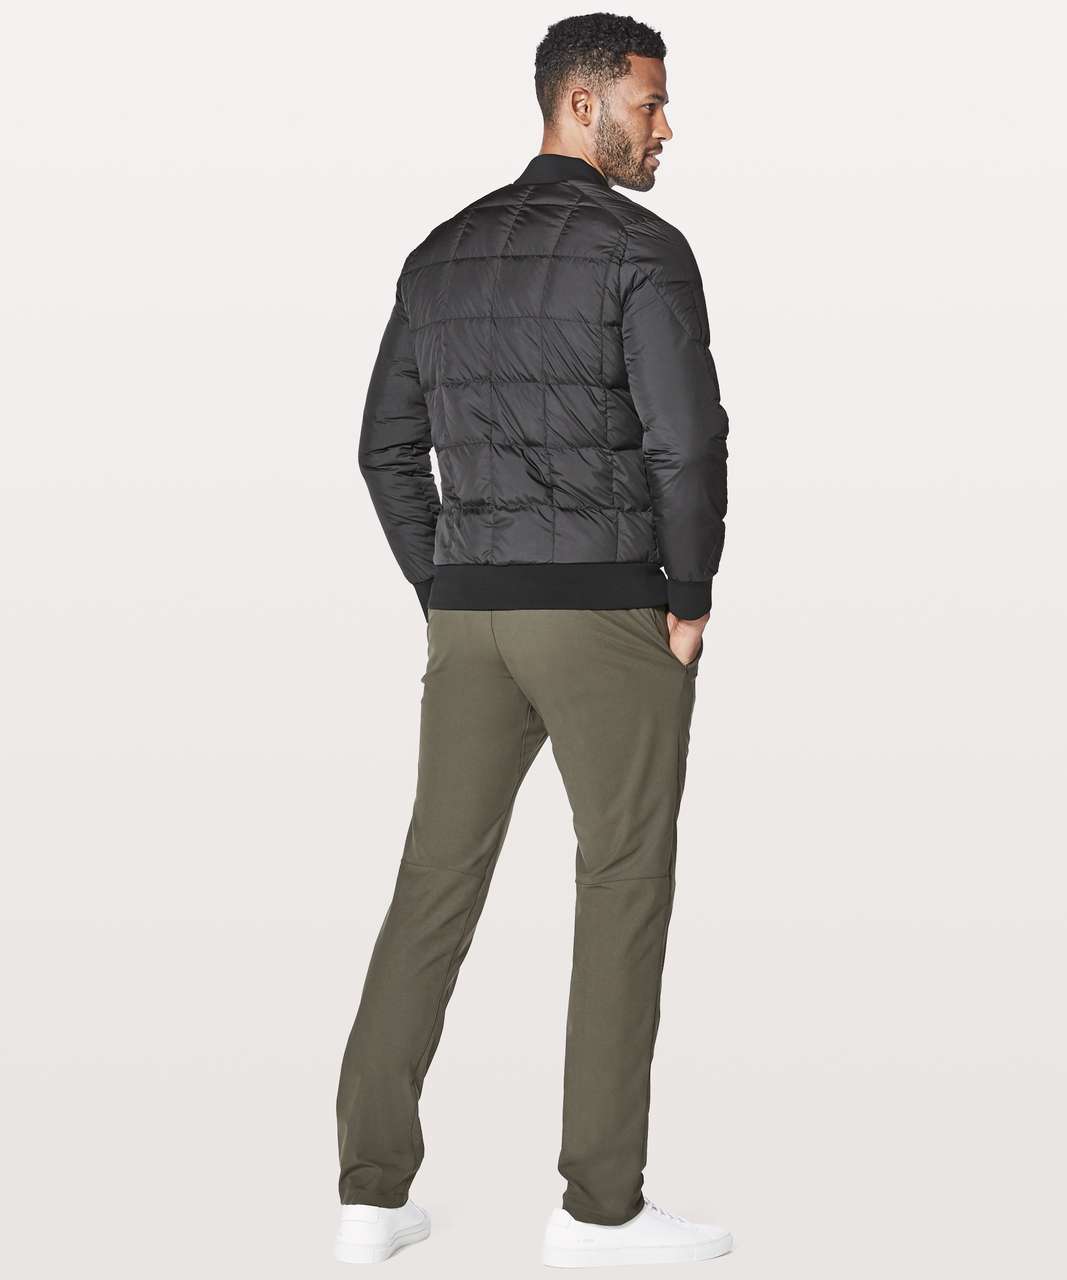 Lululemon About-Face Bomber - Black (First Release)